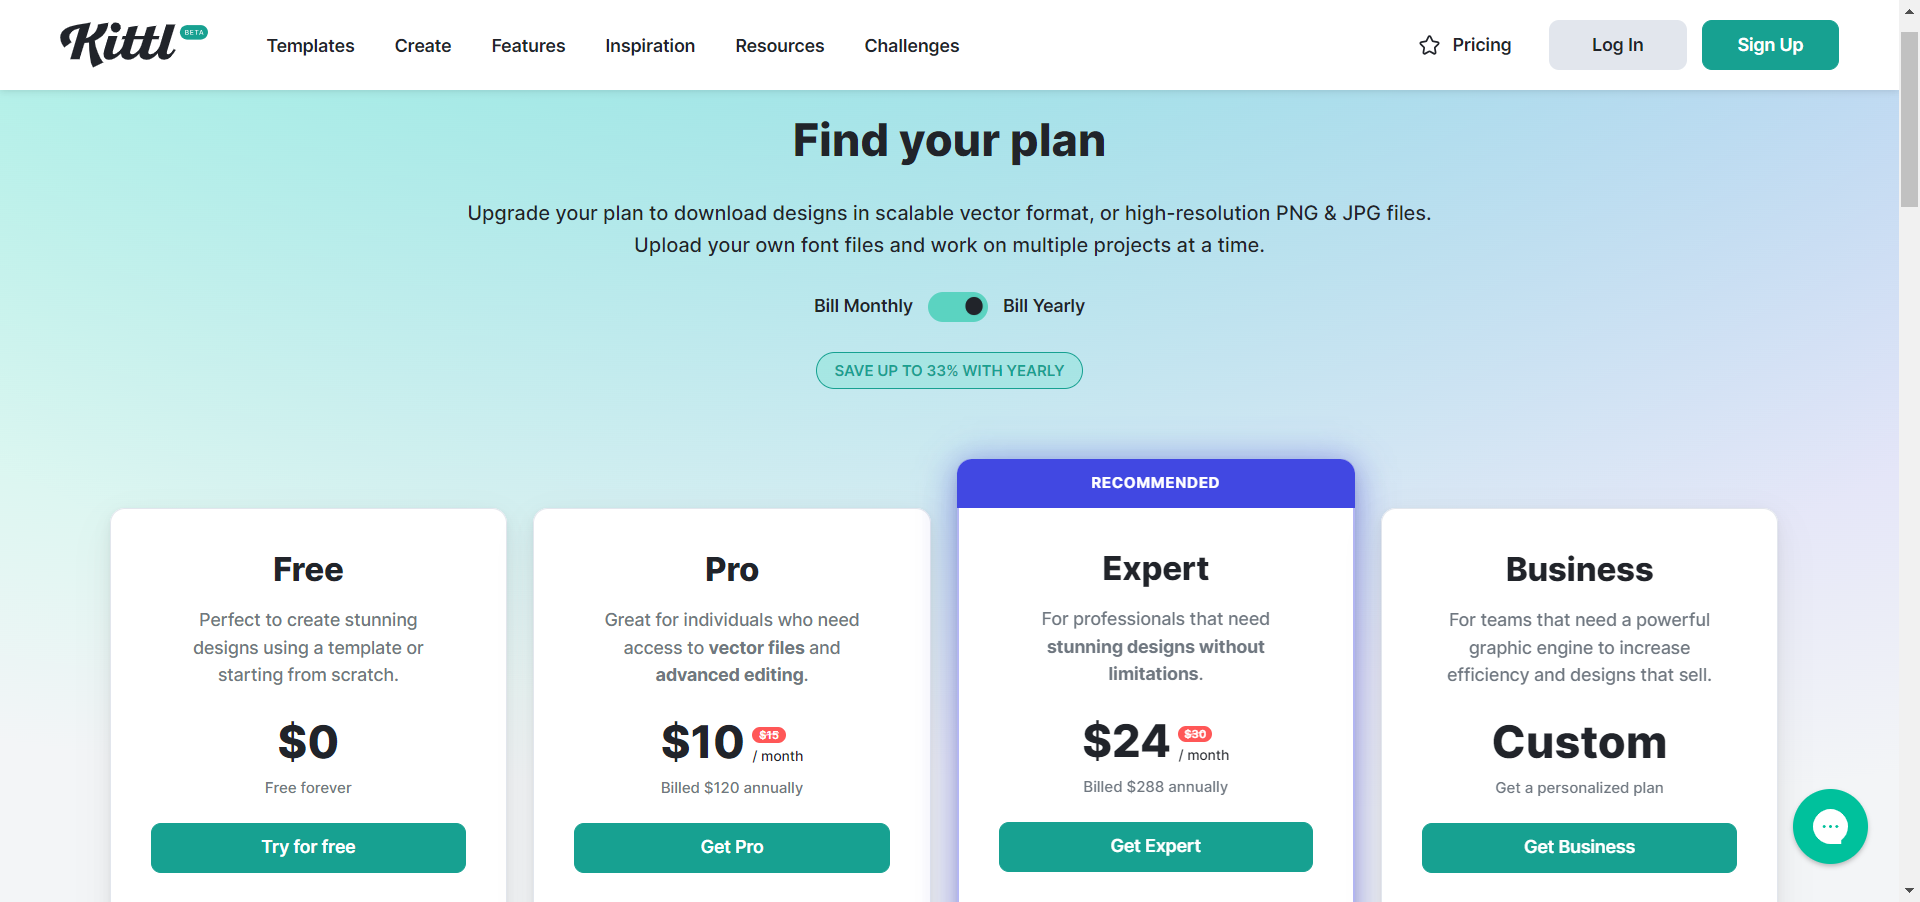 Kittl free trial and pricing plans